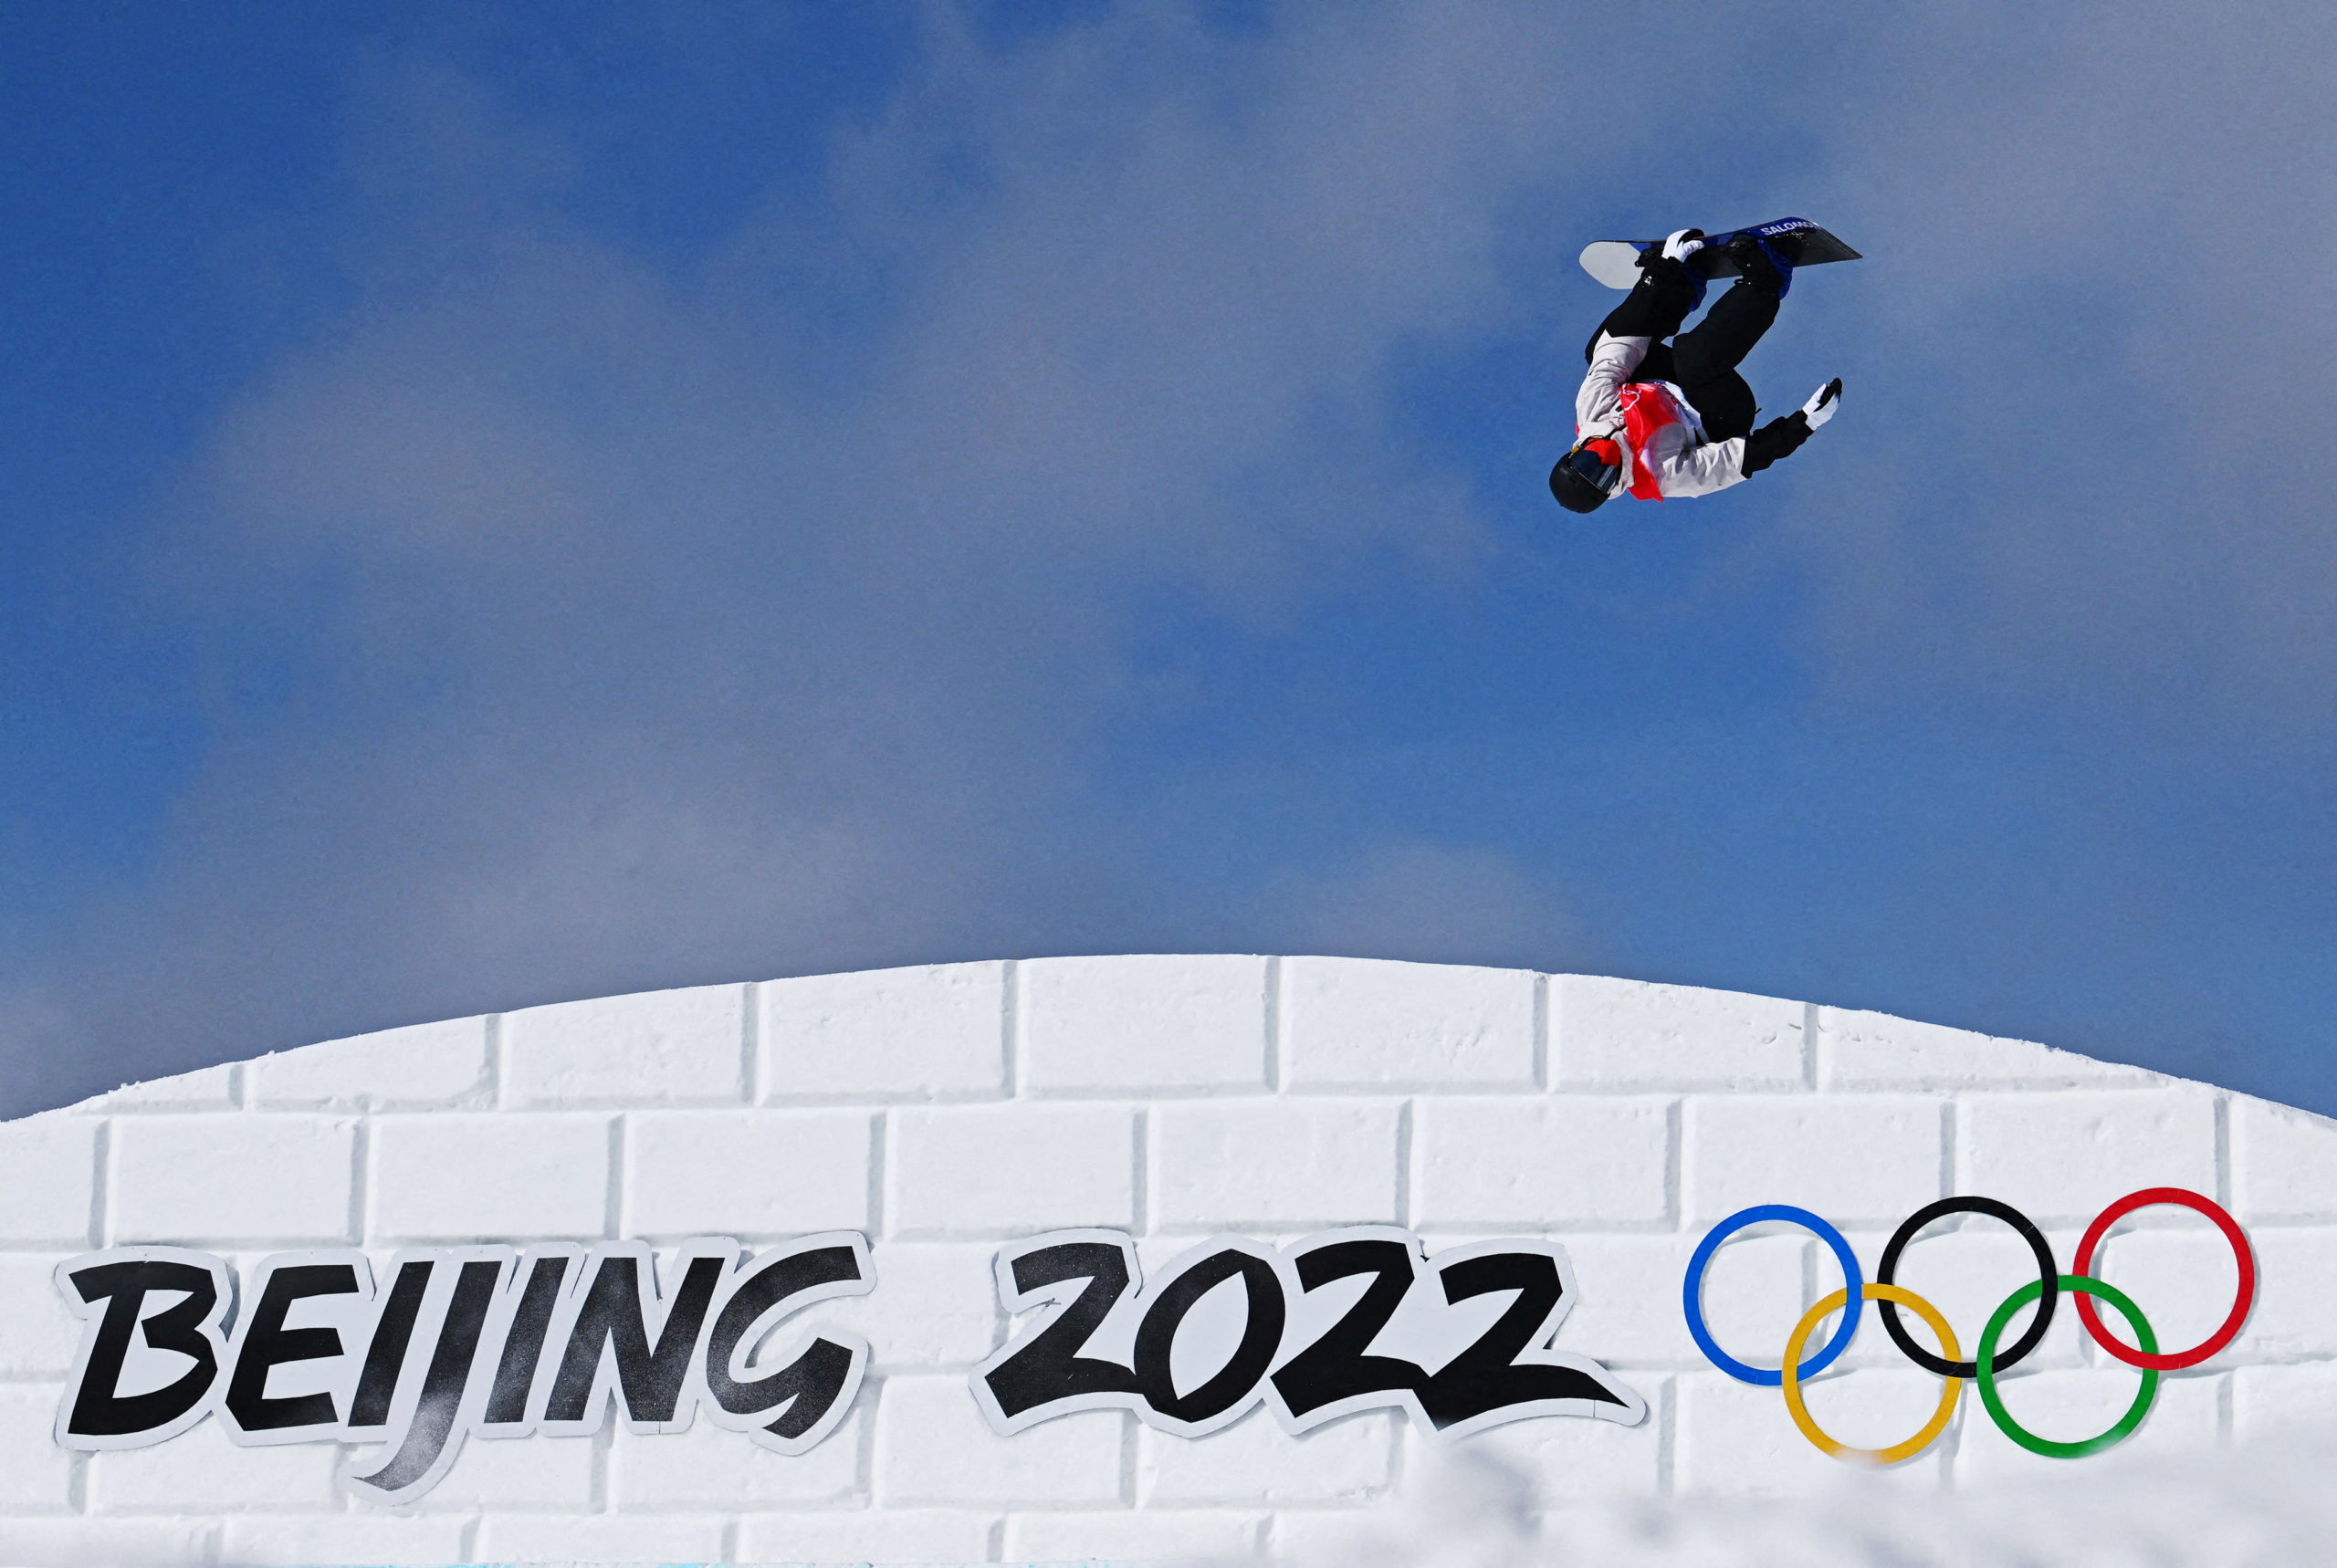 2022 Beijing Olympics - Snowboard - Men's and Women's Slopestyle Training - Genting Snow Park, Zhangjiakou, China - February 3, 2022. An athlete in action during training 